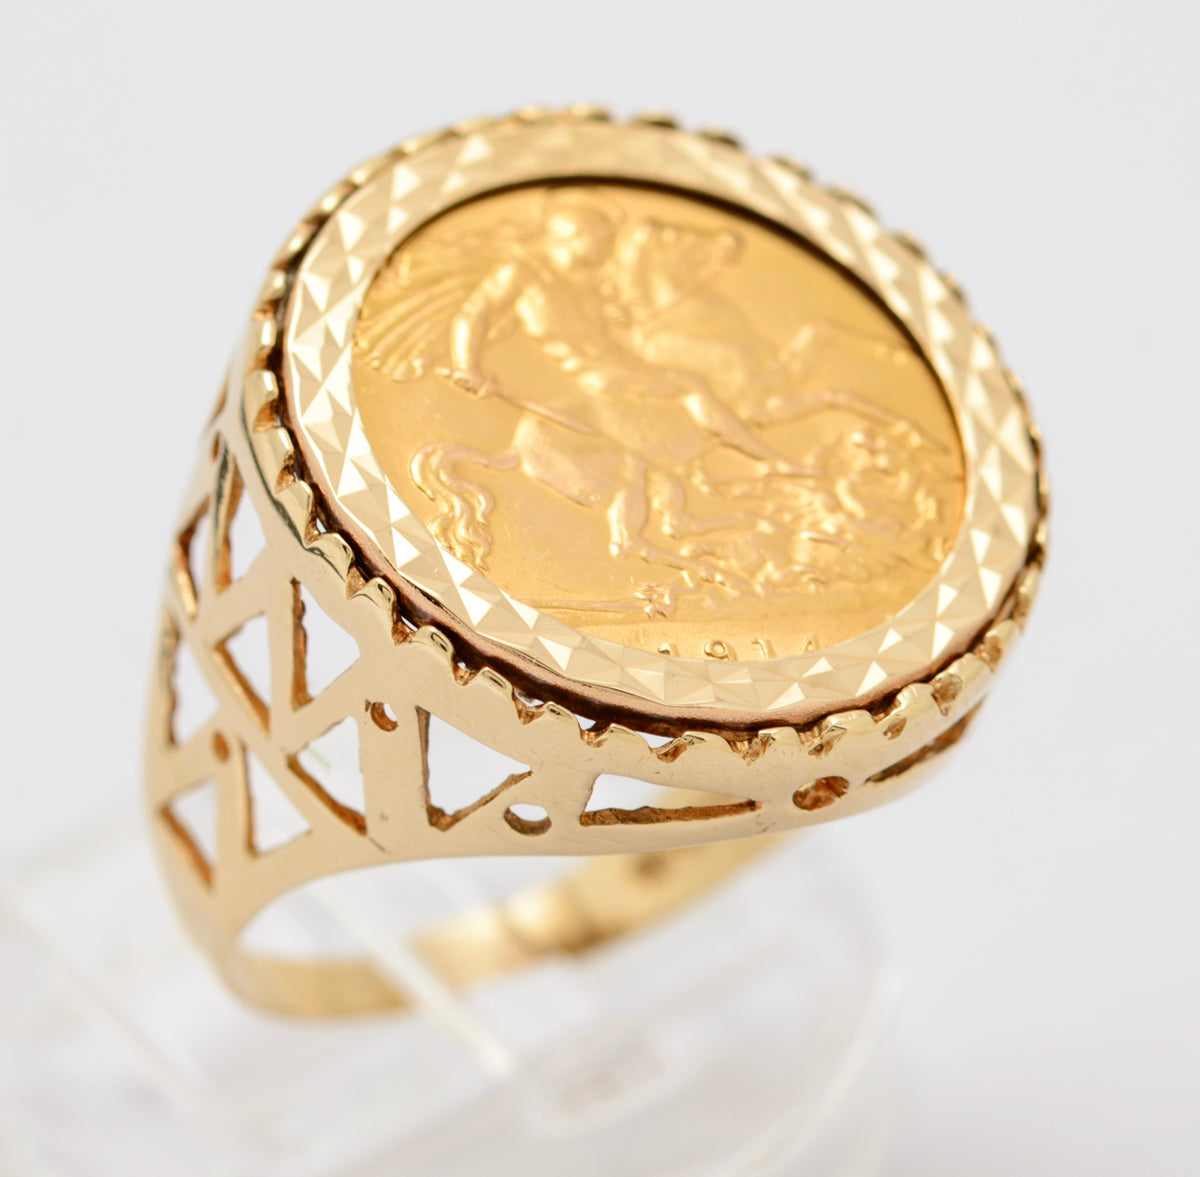 Antique 22ct Gold Half Sovereign Coin In 9ct Gold Ring Mount H'mark 1979 (A1655)